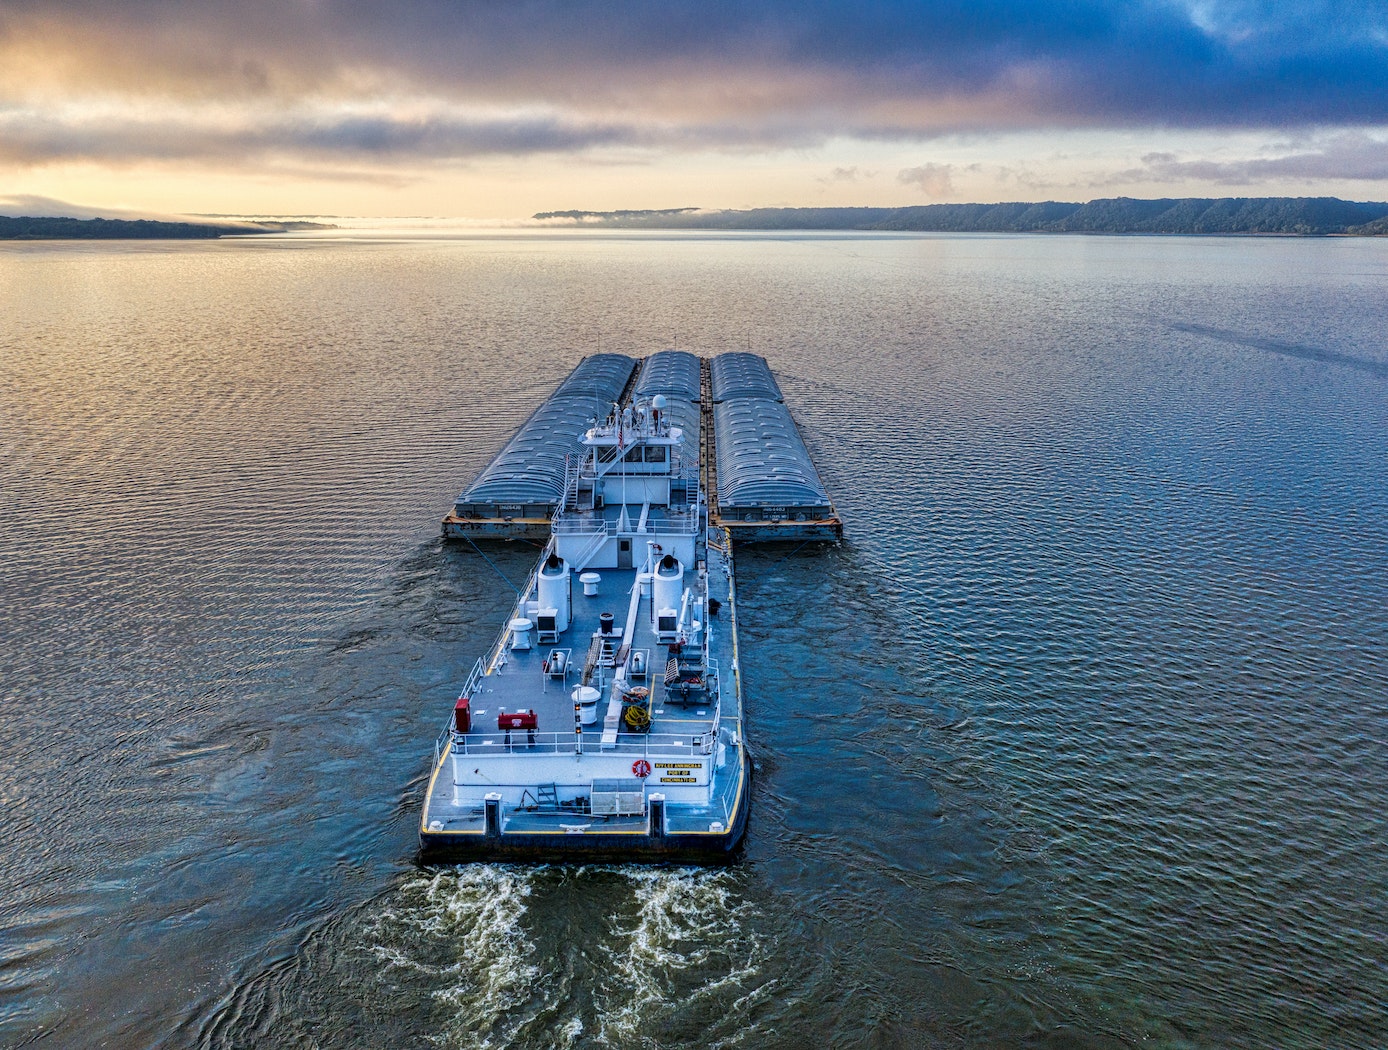 Royalty free stock photograph downloaded from https://www.pexels.com/photo/aerial-photography-of-a-barge-on-the-ocean-during-sunset-9552905/